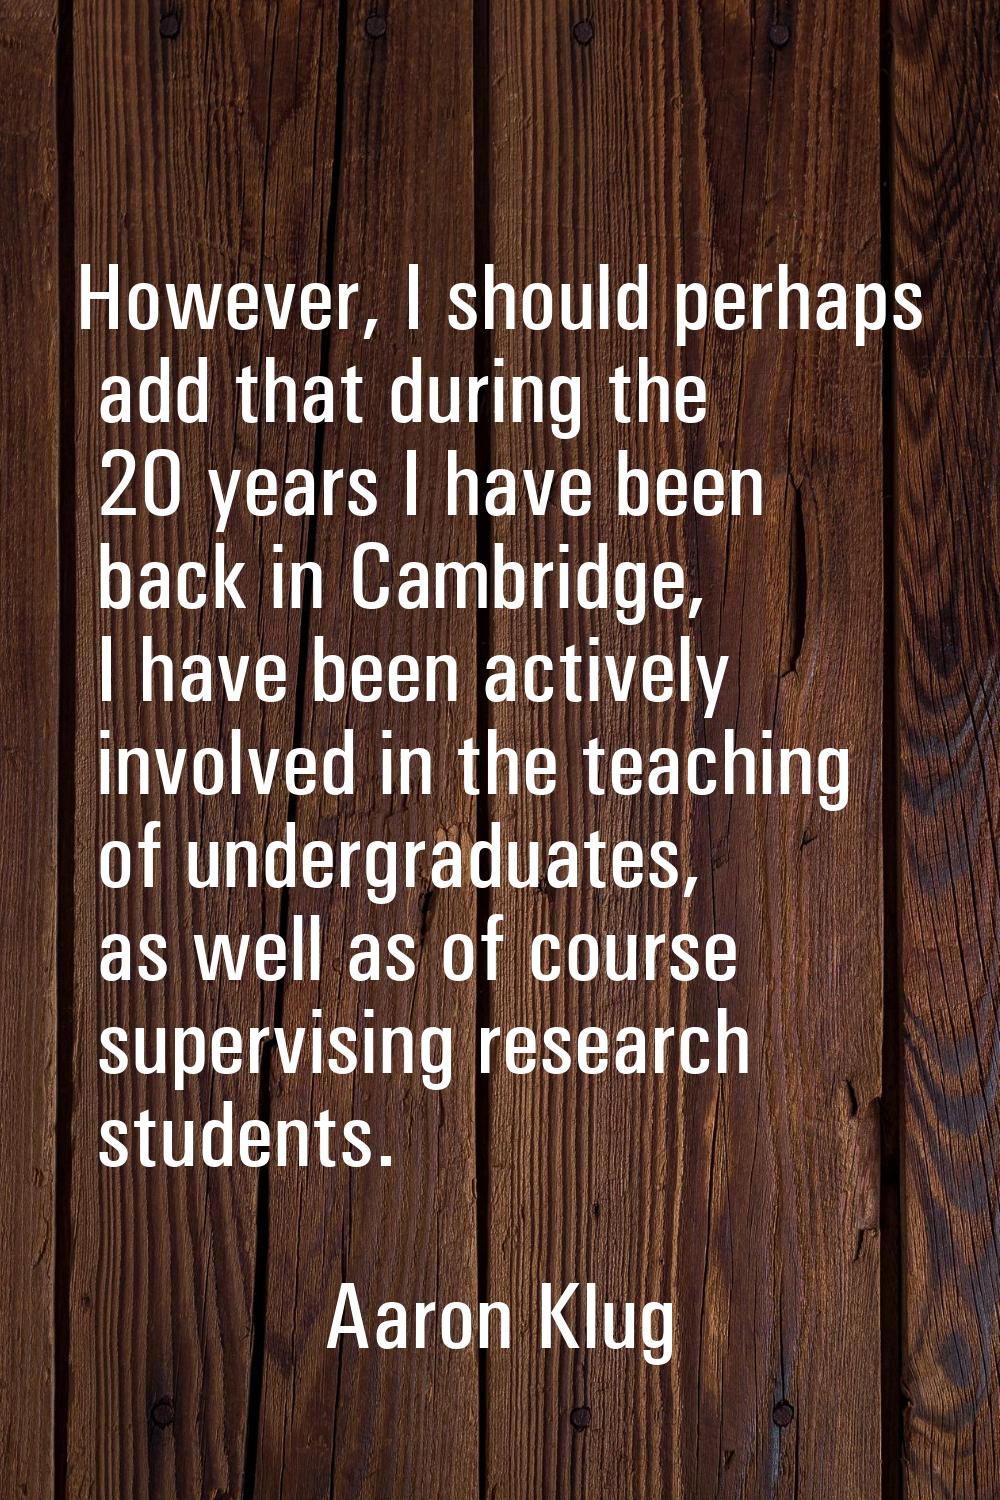 However, I should perhaps add that during the 20 years I have been back in Cambridge, I have been a